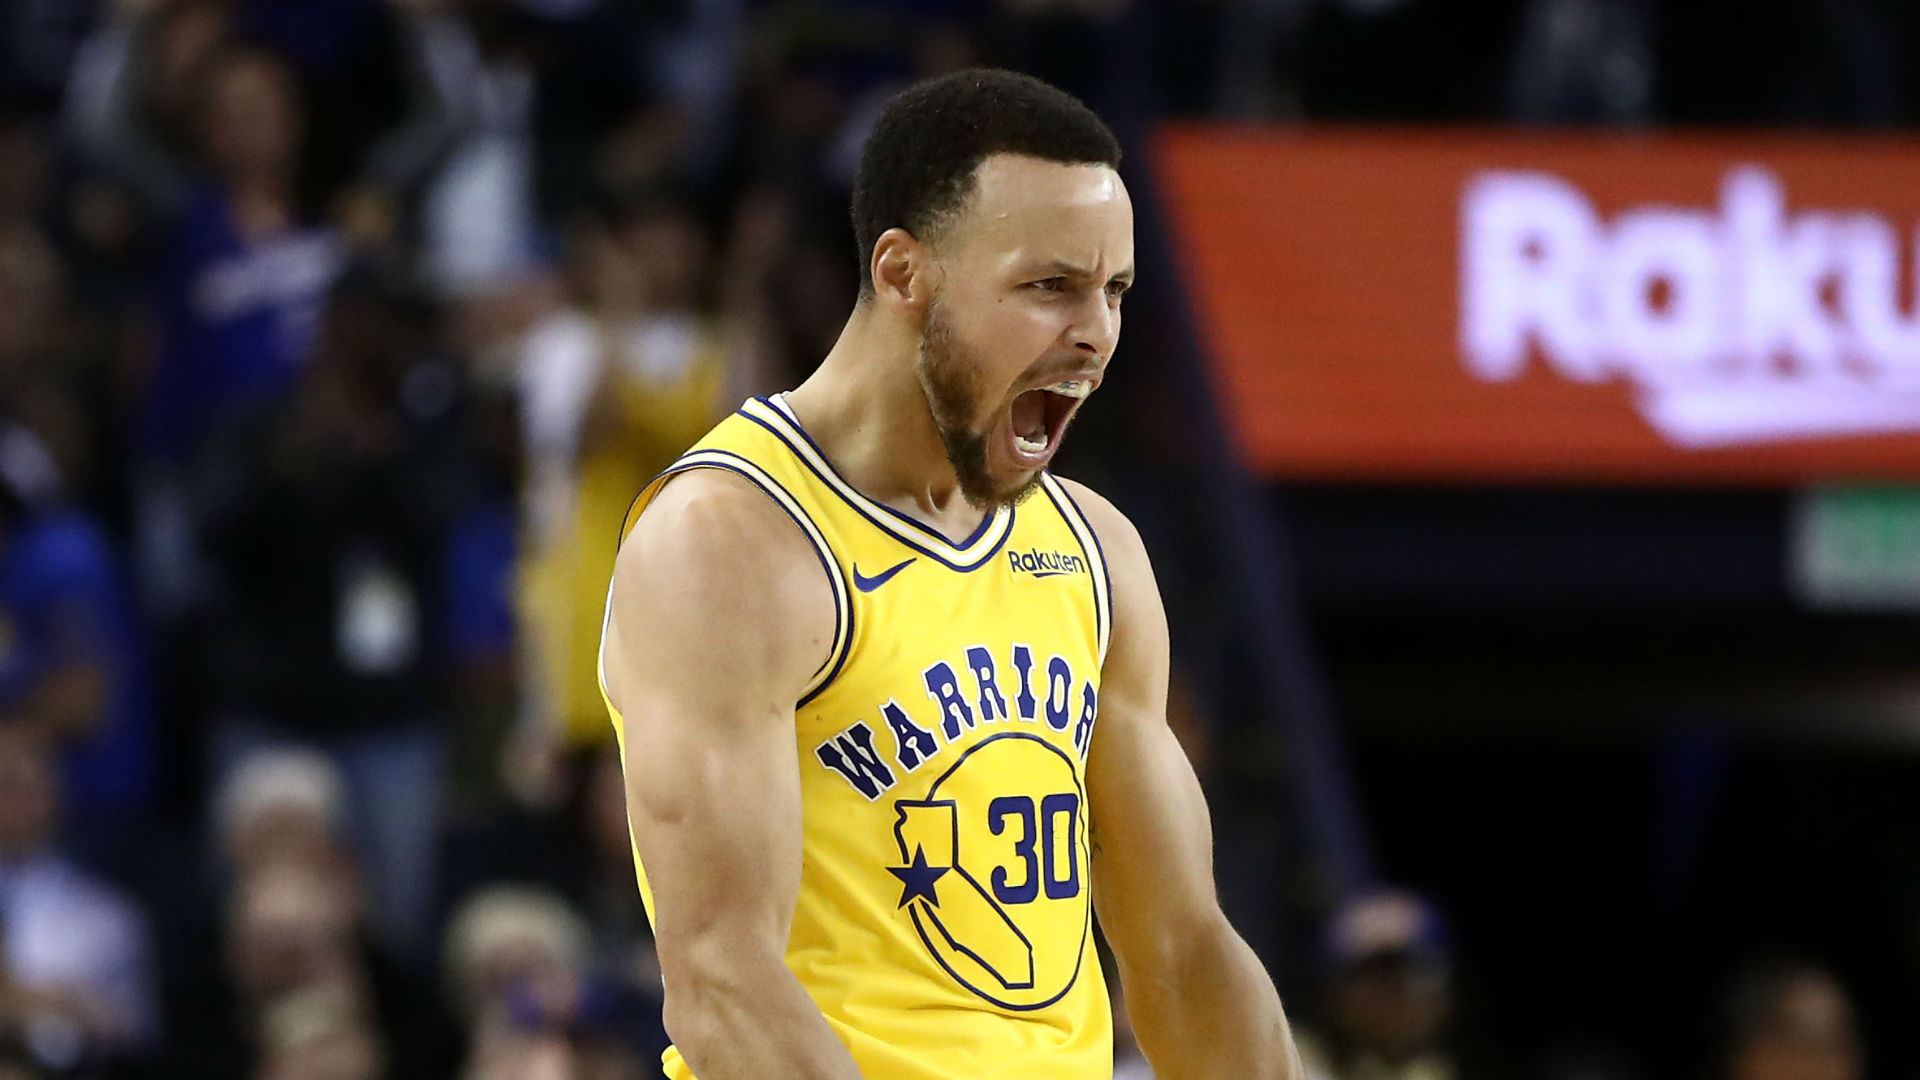 Stephen Curry said the Golden State Warriors' win over the Denver Nuggets has given his side control of their own destiny this season.